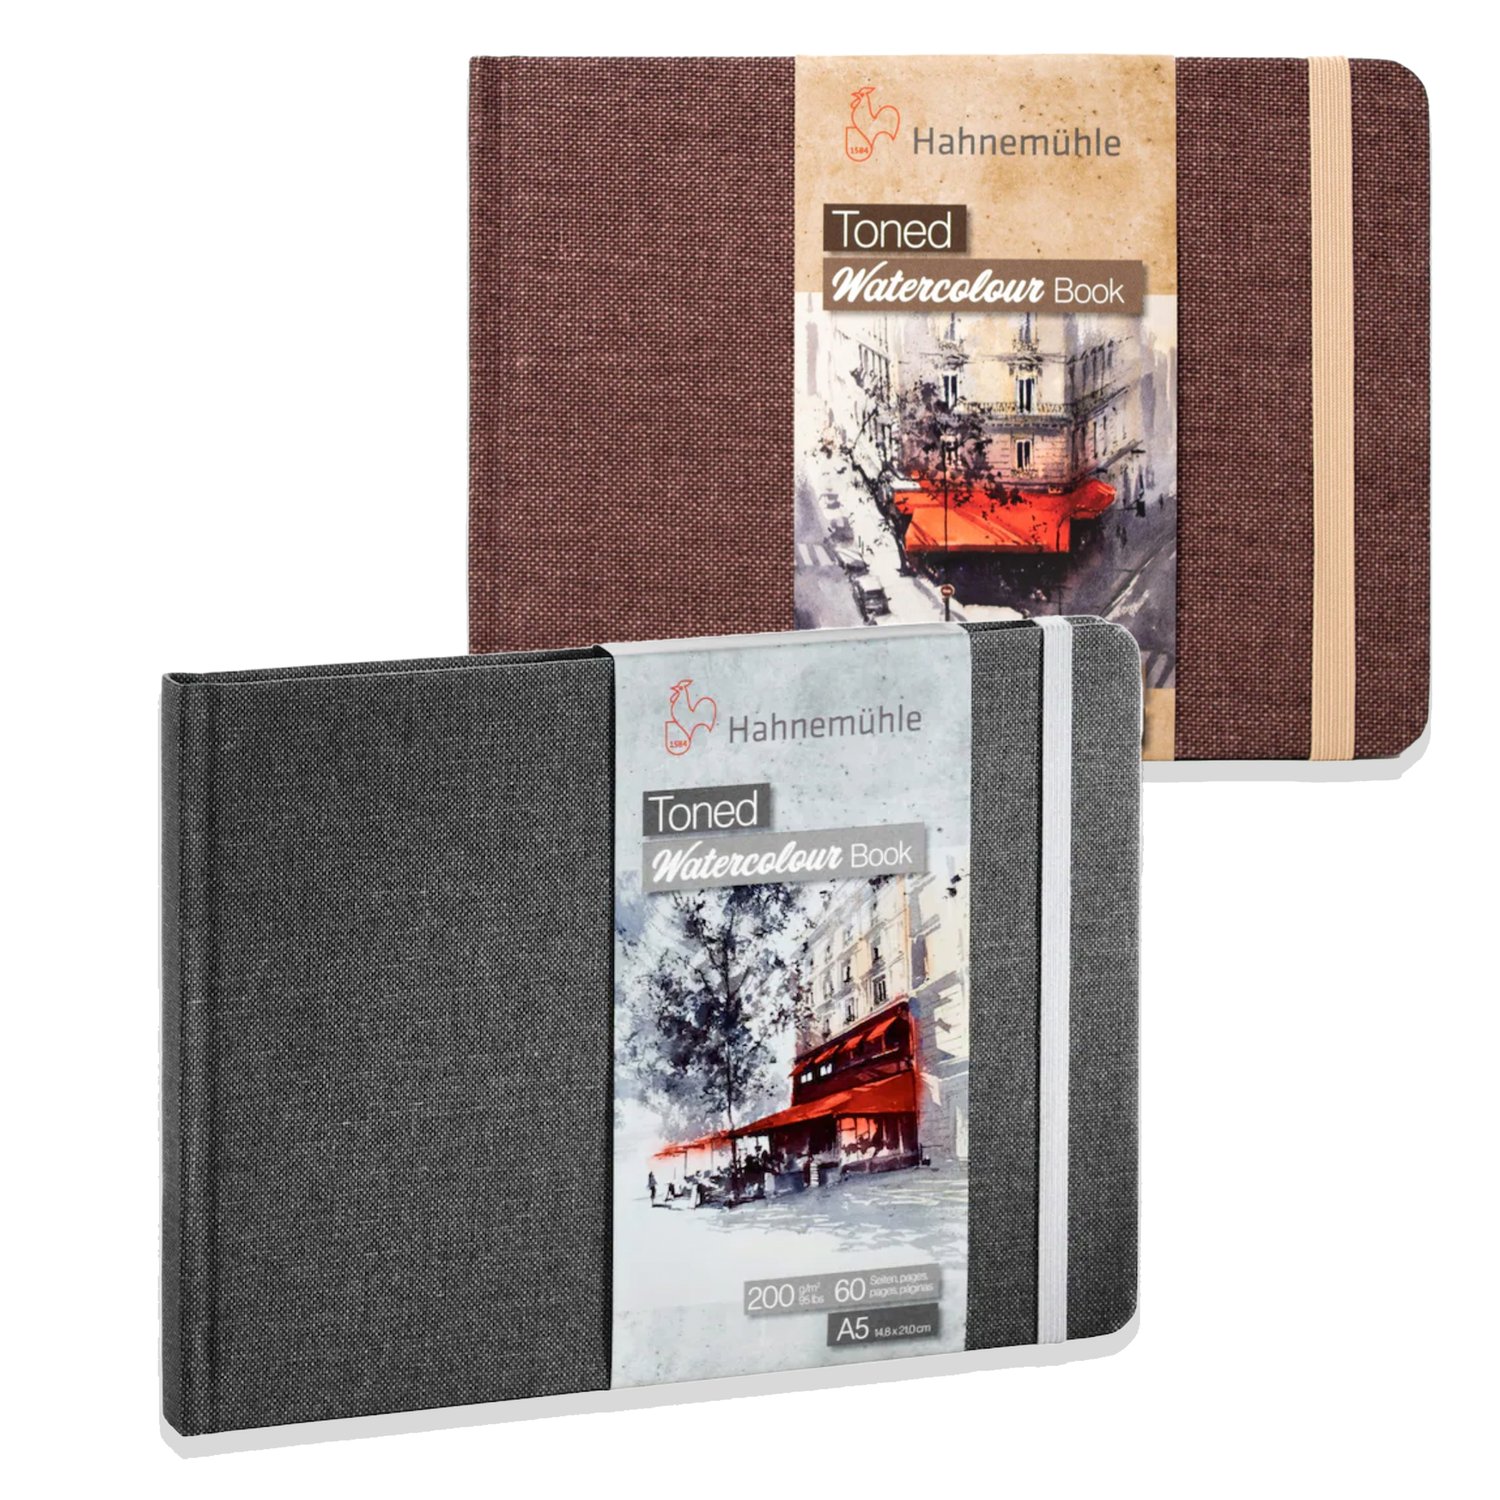 Hahnemuhle Toned Grey Watercolor Paper Book, 30 Sheets, Square, 5.5 x 5.5